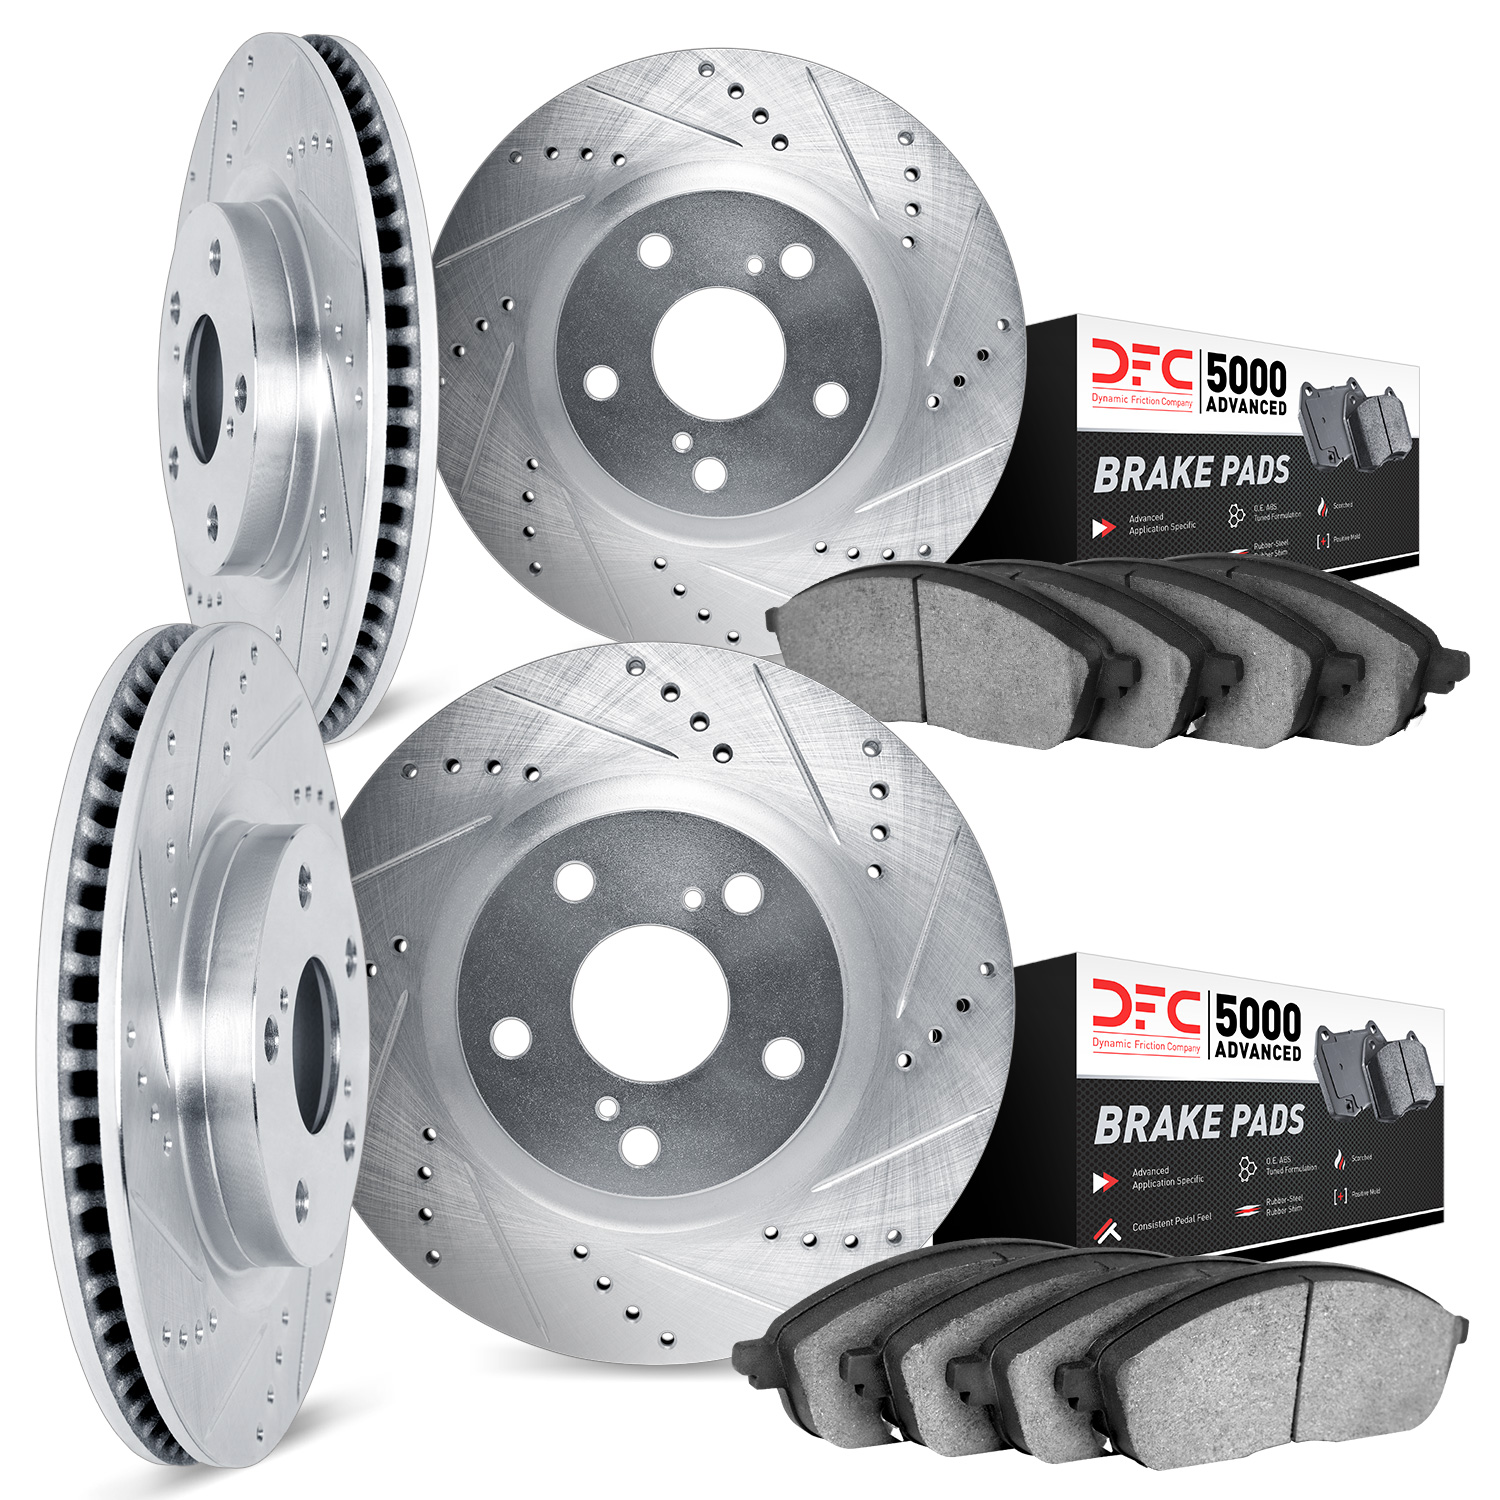 7504-31050 Drilled/Slotted Brake Rotors w/5000 Advanced Brake Pads Kit [Silver], 2013-2018 BMW, Position: Front and Rear